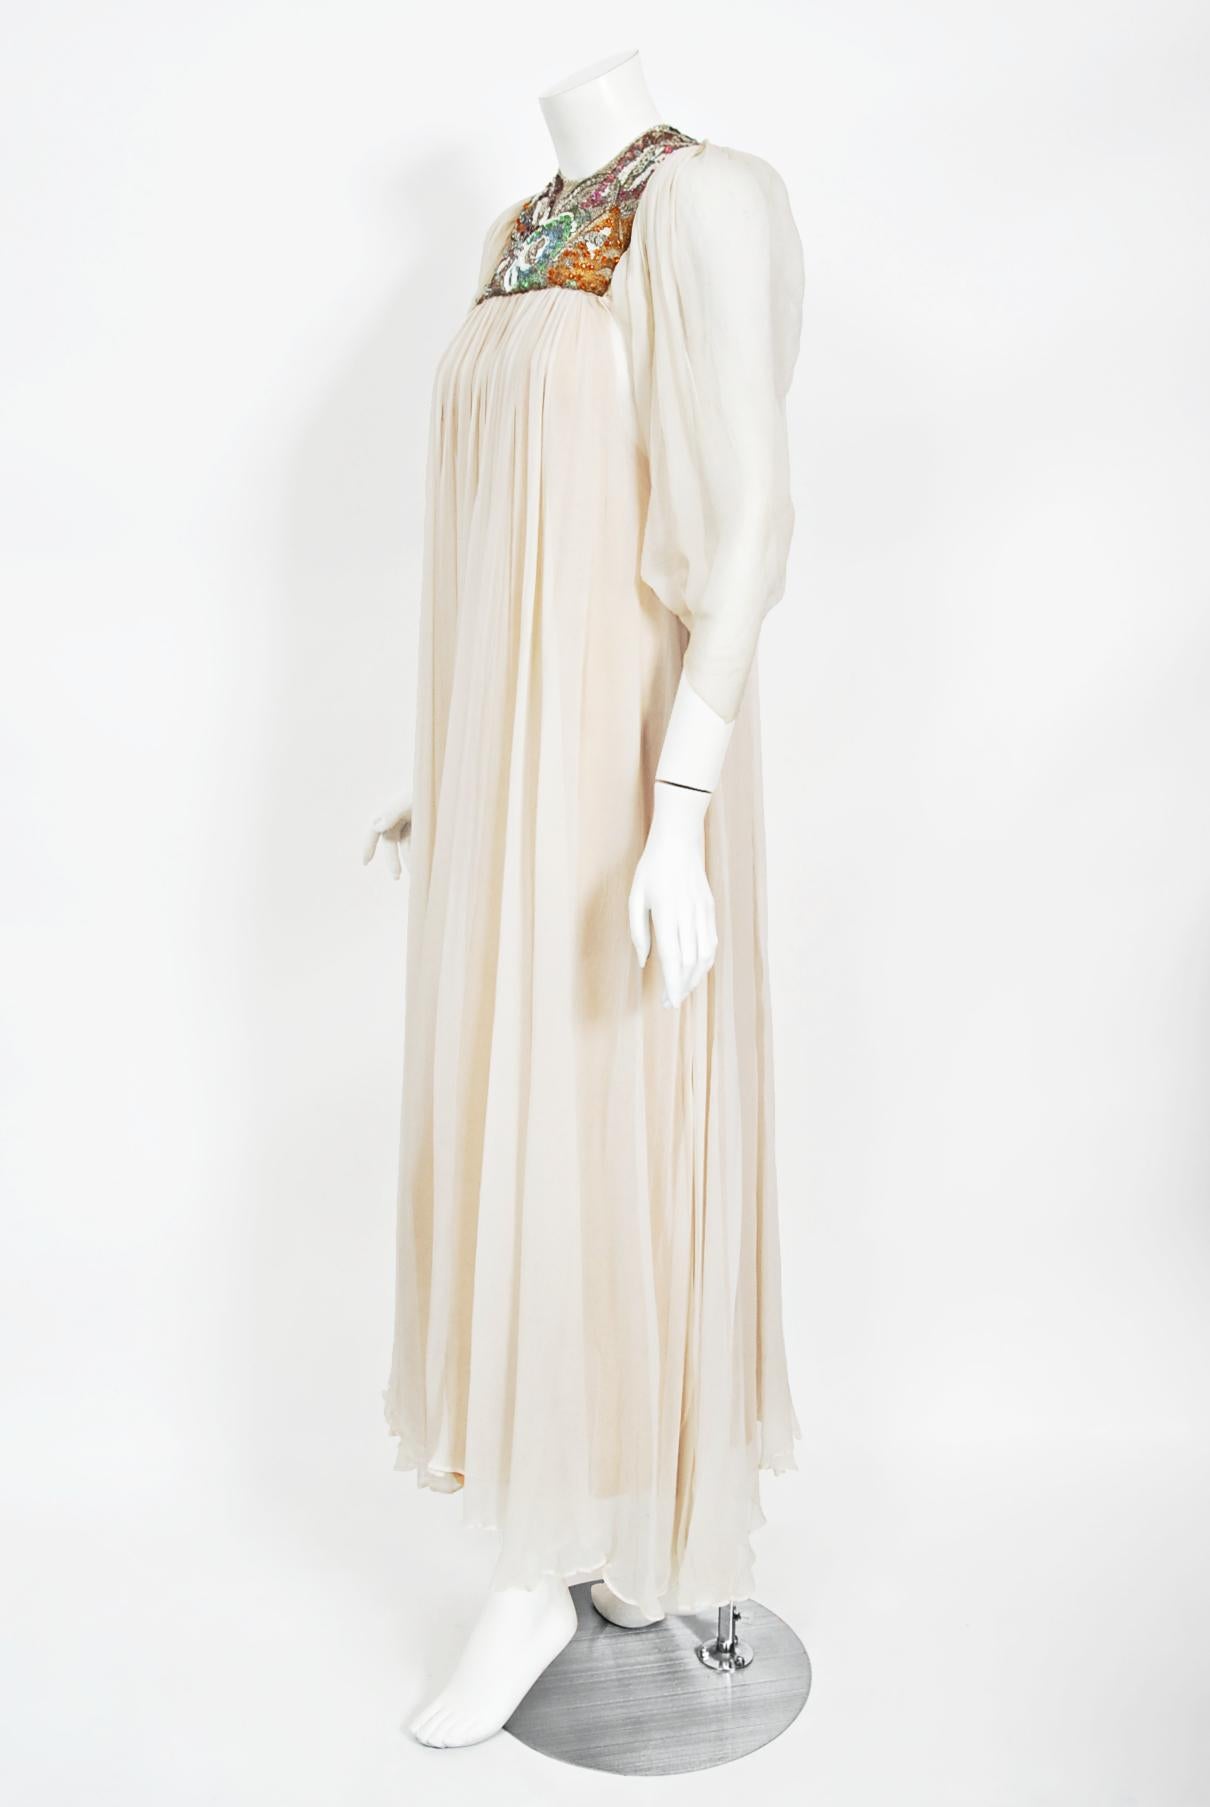 1970's Madame Grès Haute Couture Beaded Embroidered Ivory Sheer Silk Bridal Gown In Good Condition For Sale In Beverly Hills, CA